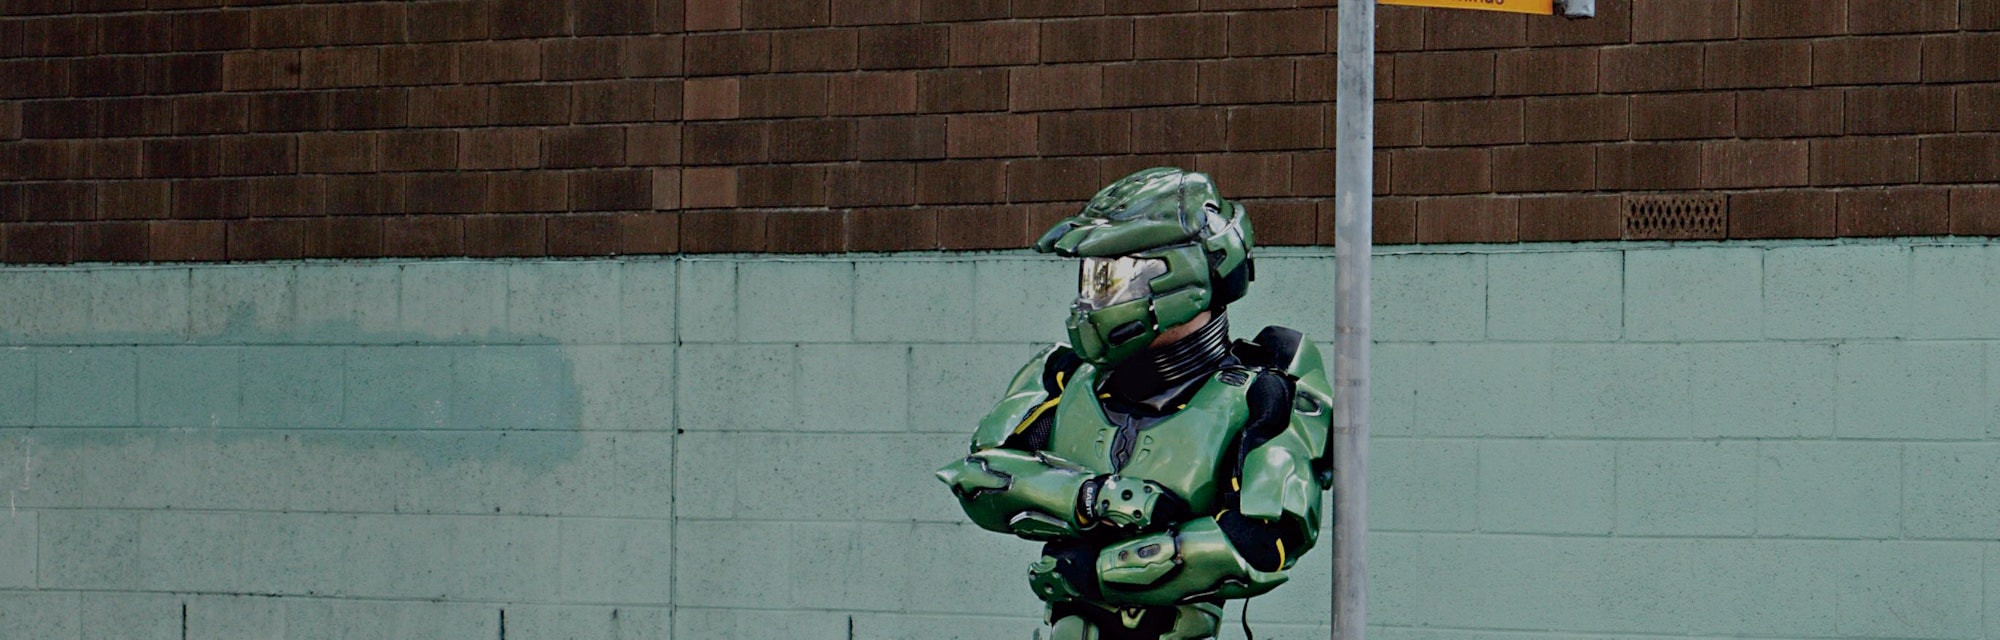 (AUSTRALIA OUT) Alexandria, Halo 2 computer game character Master Chief at a bus stop, 26 April 2005...